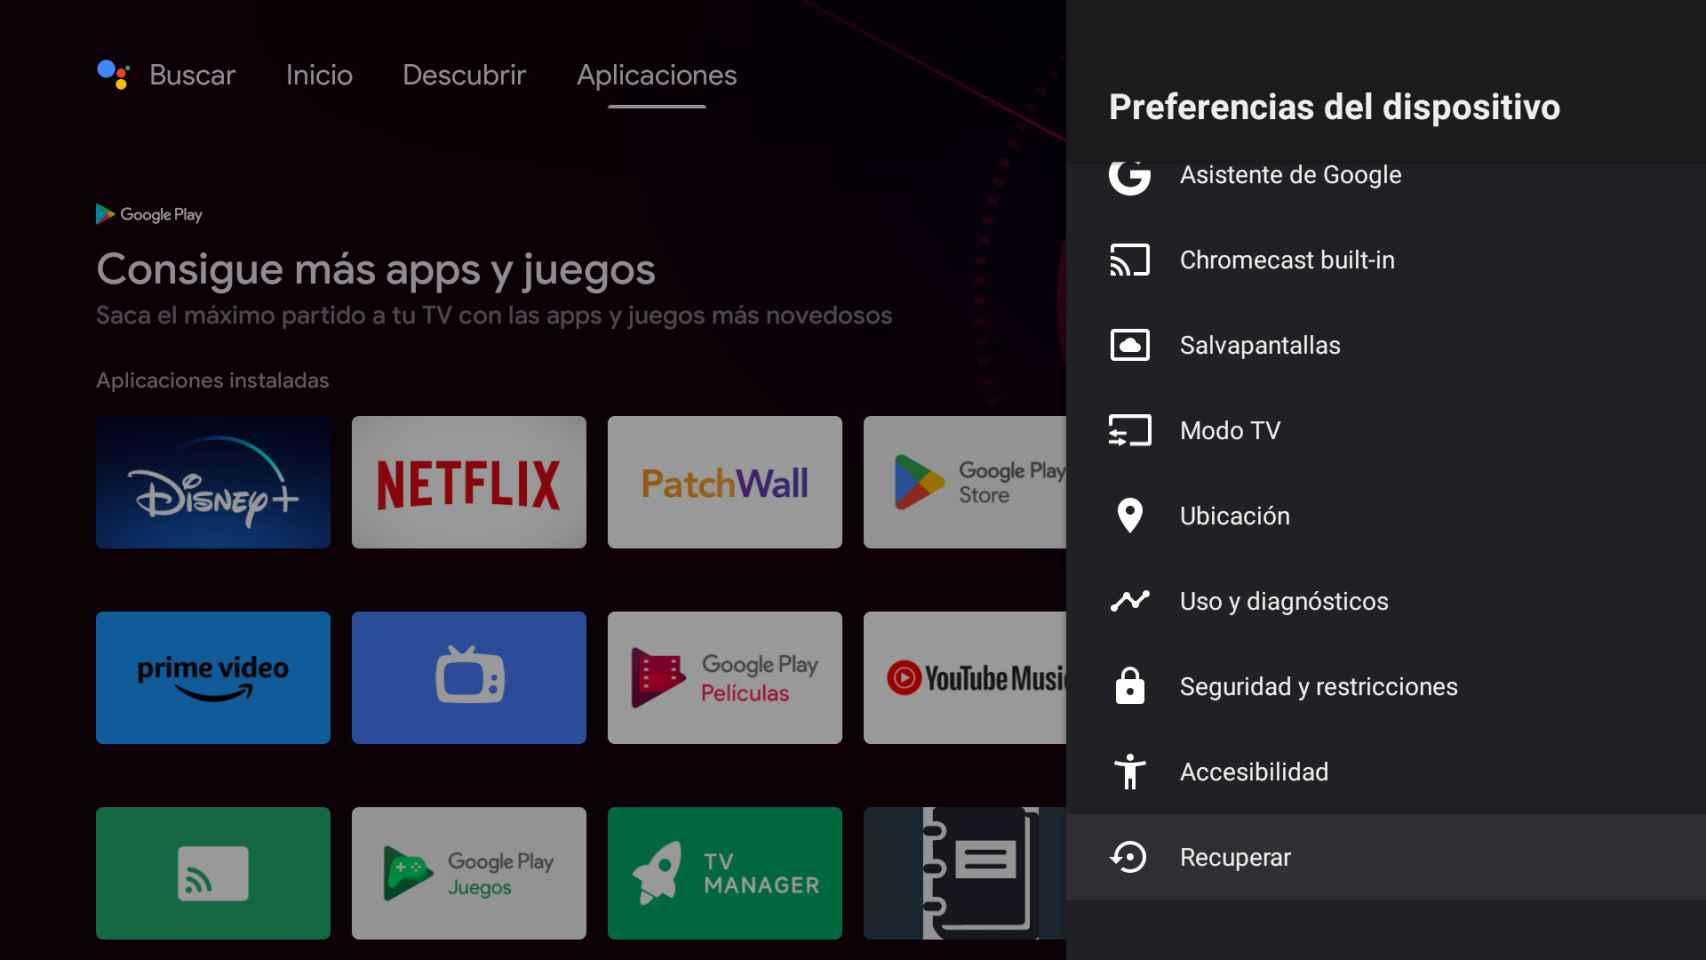 Android TV settings